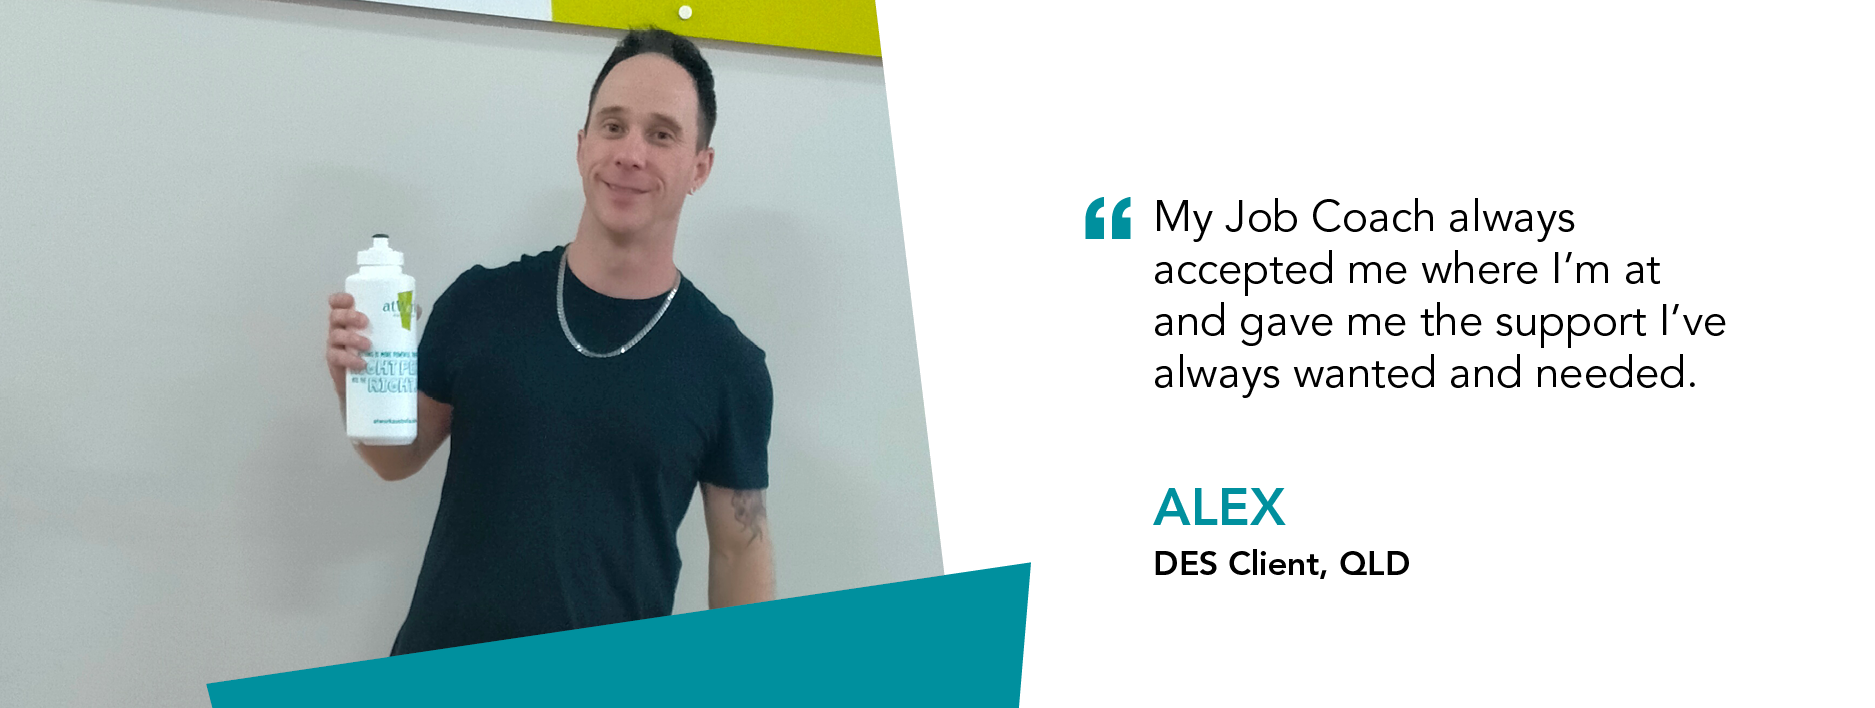 "My Job Coach always accepted me where I'm at and gave me the support I've always wanted and needed." Alex DES Client QLD